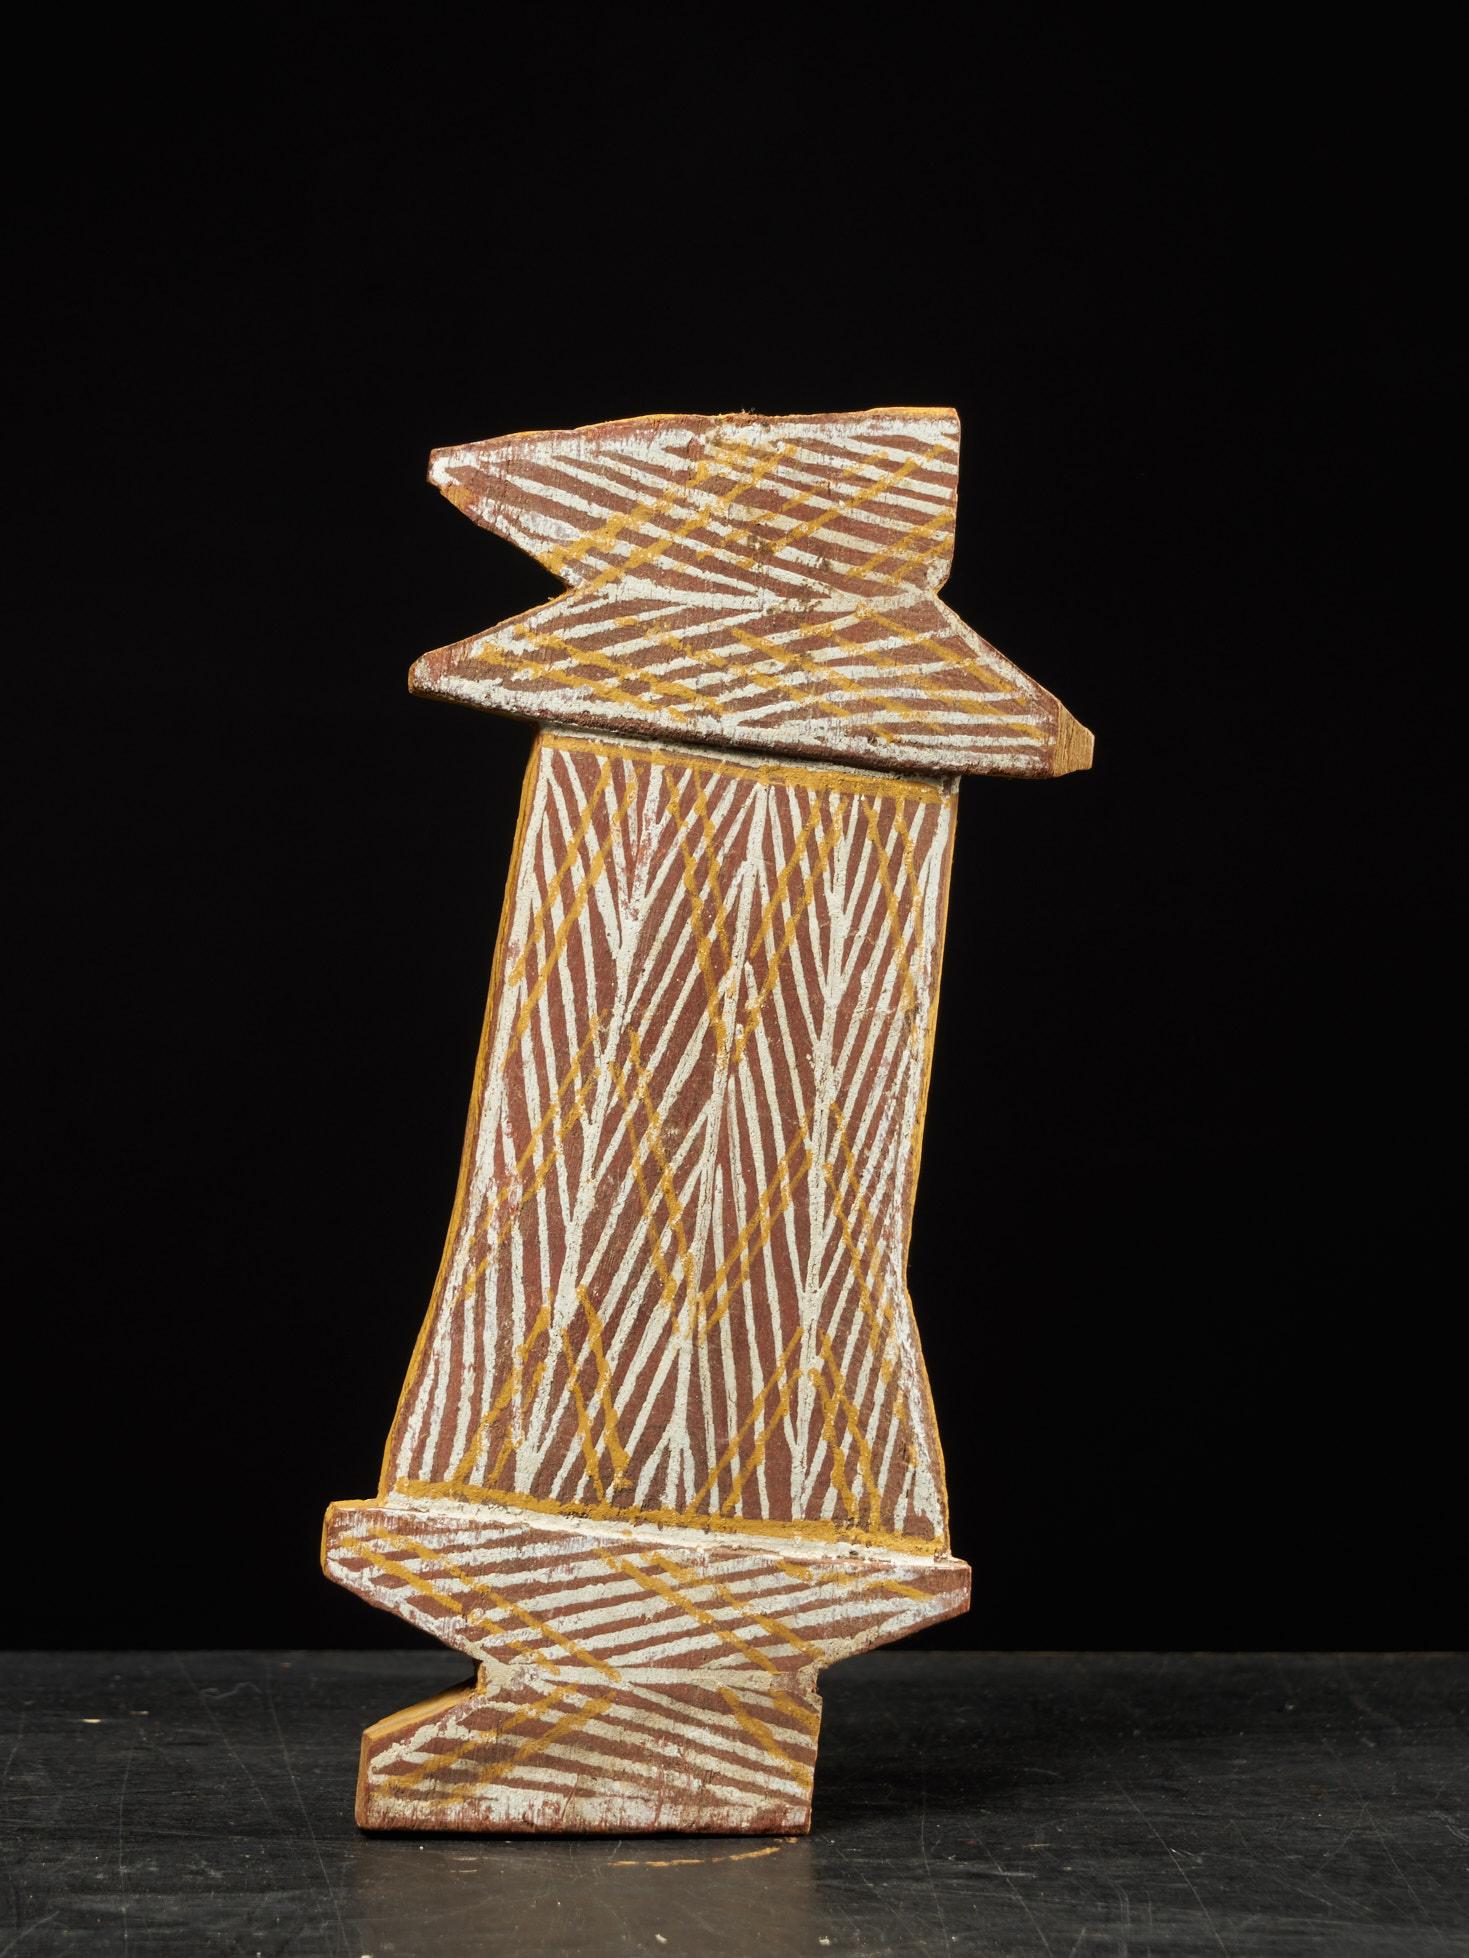 Aboriginal People, Australia, Tiwi painted ritual object and clapper sticks.